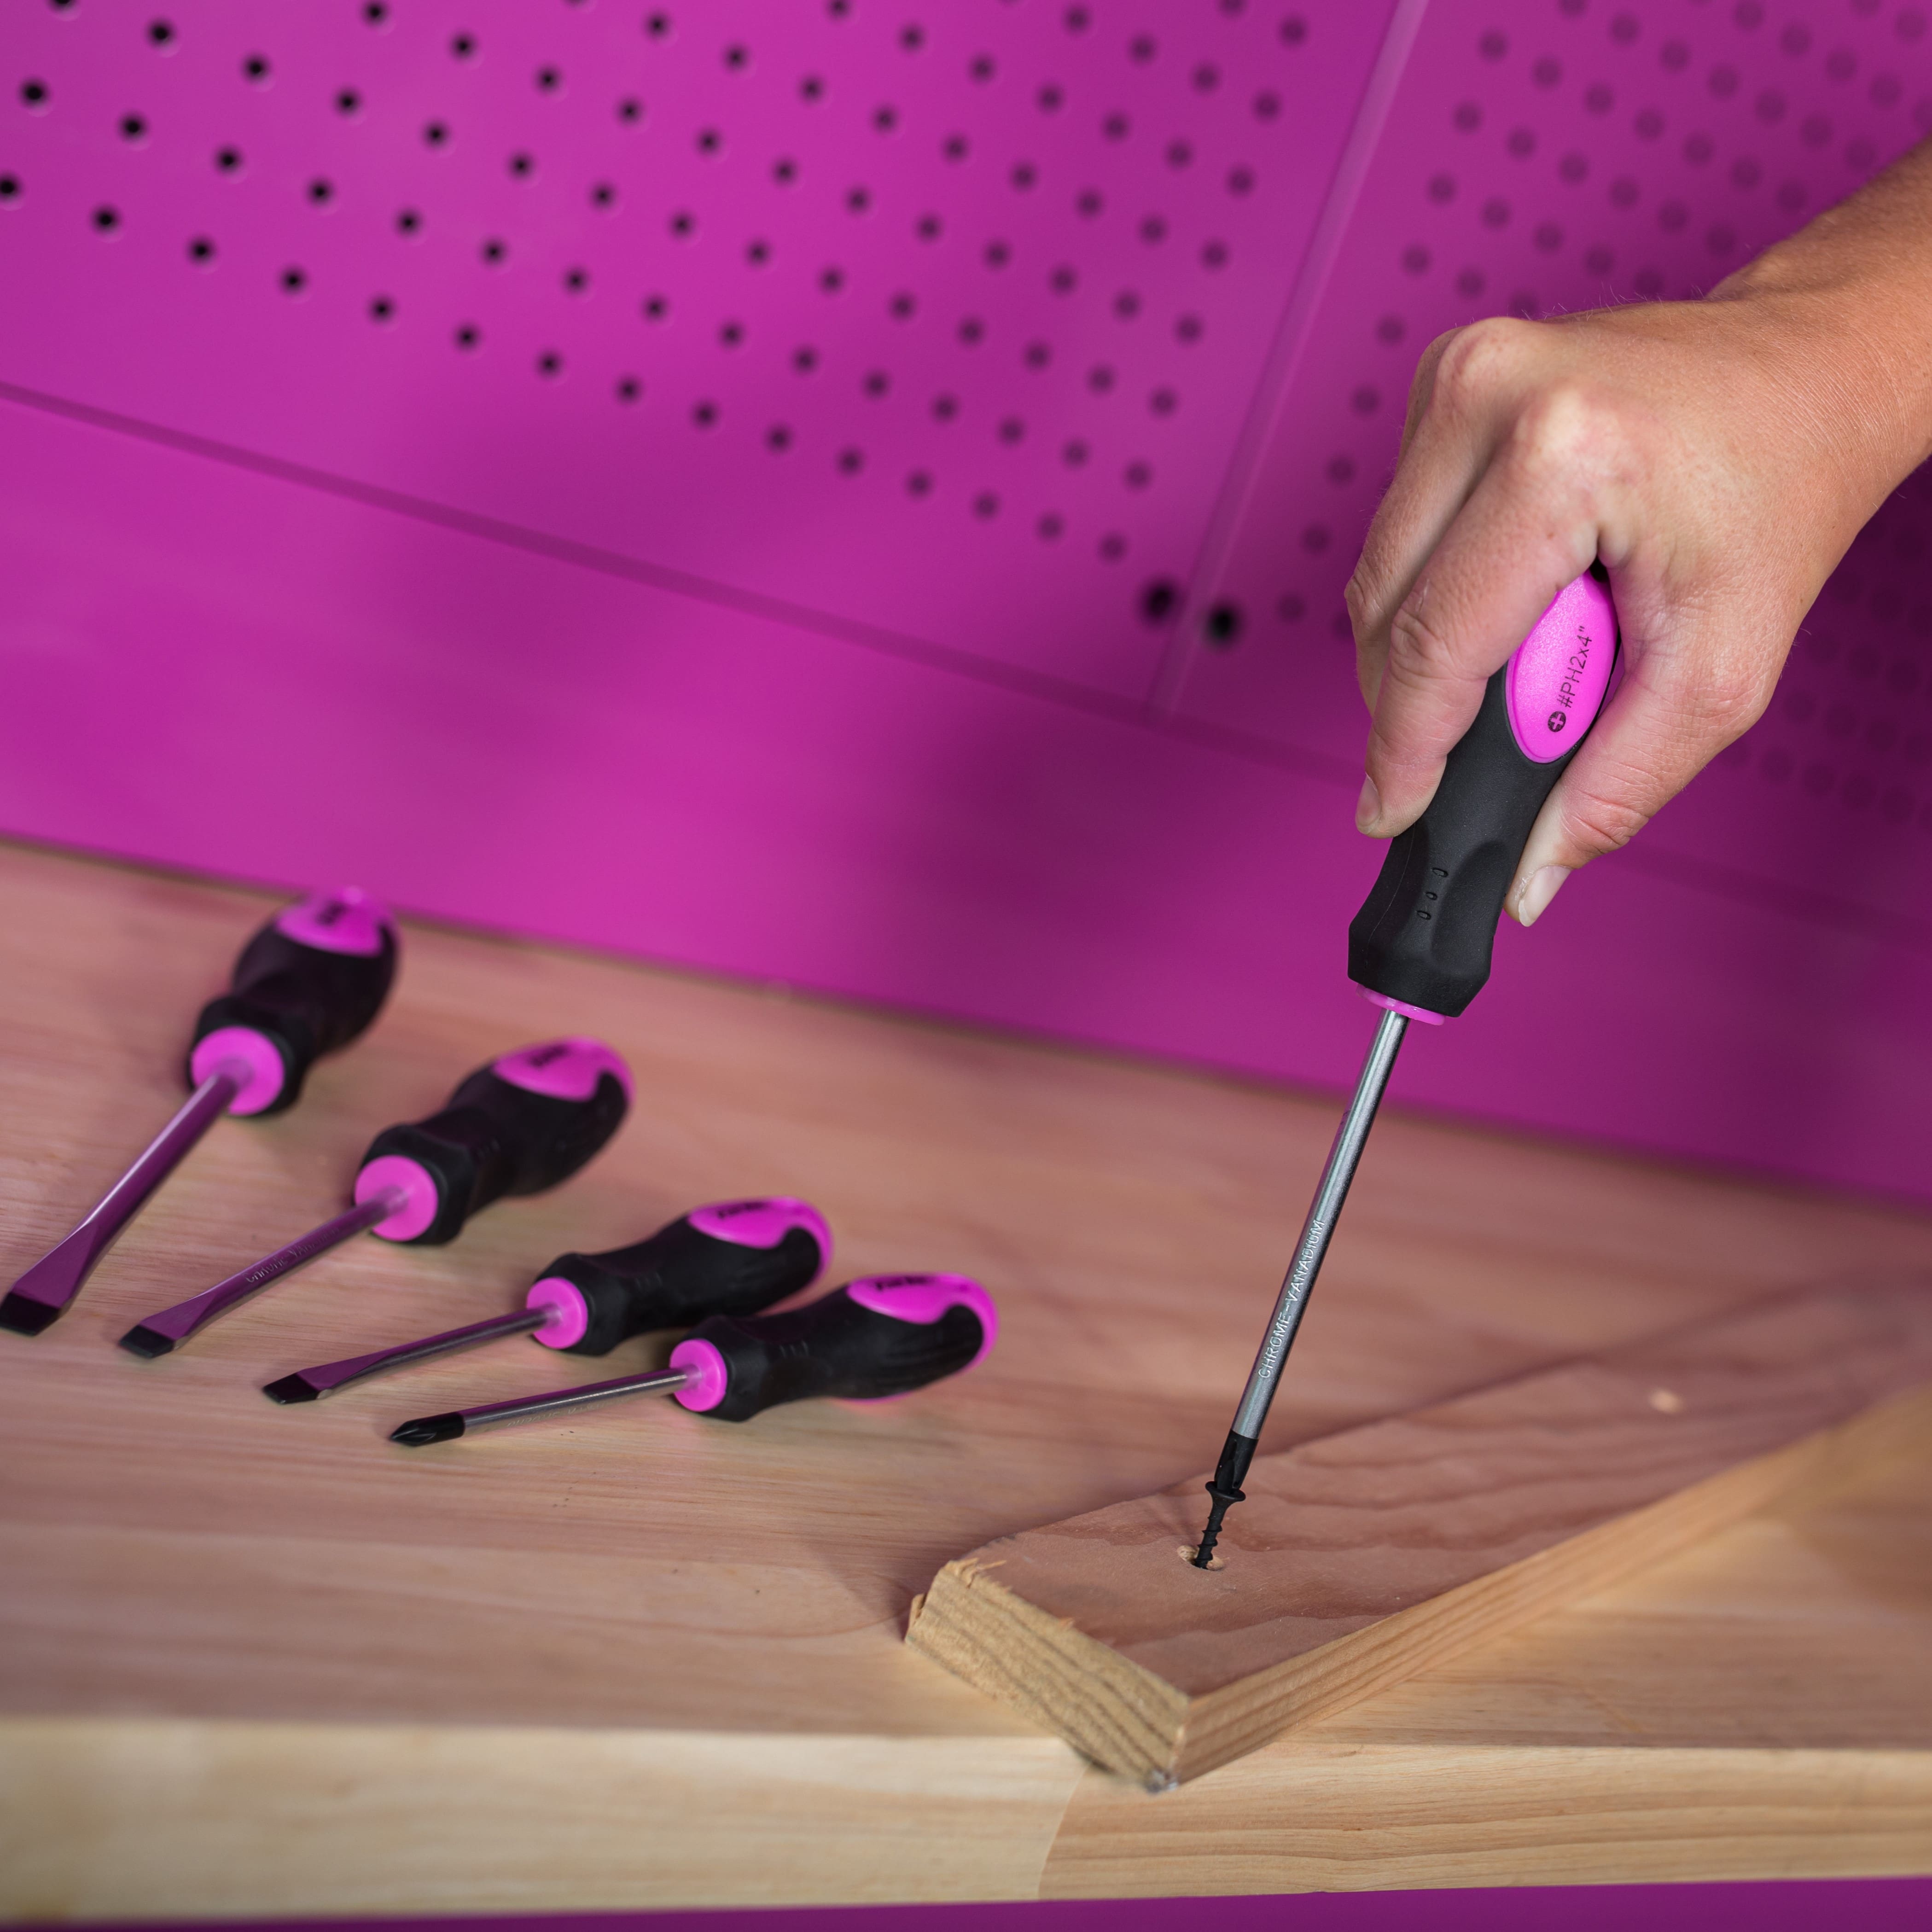 pink screwdriver being used on wood